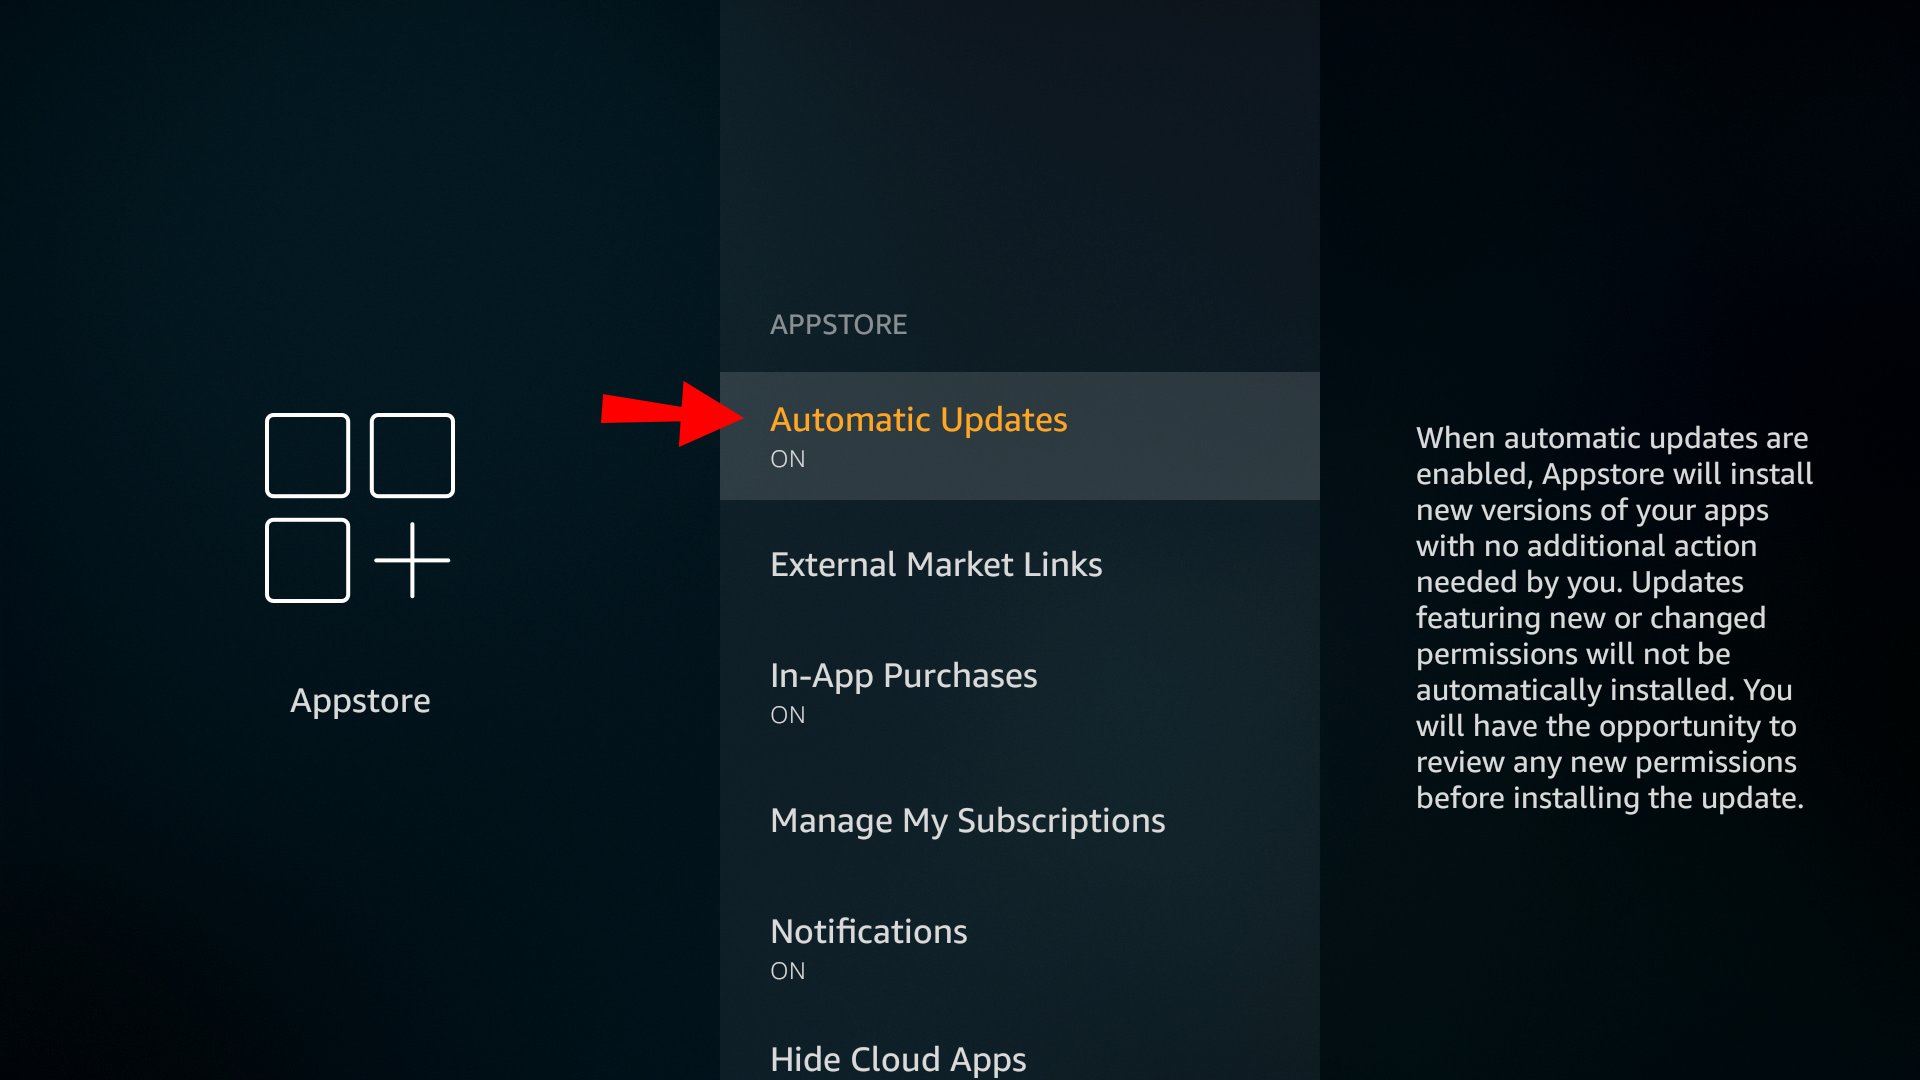 How to Update Apps on the Amazon Fire Stick